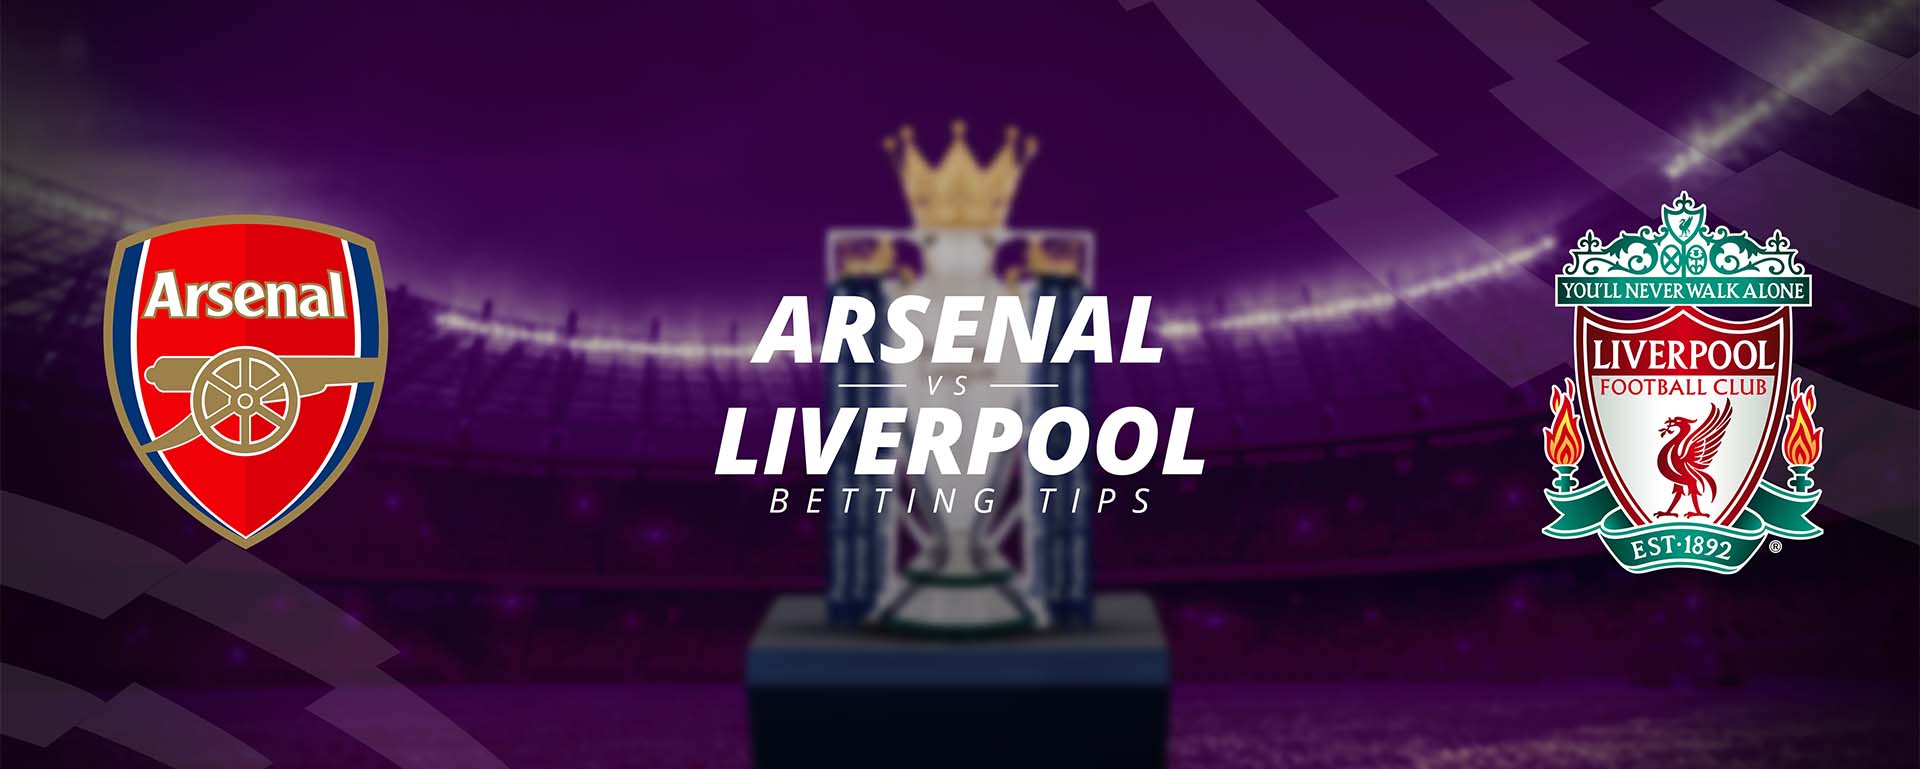 Liverpool v arsenal match betting how old to bet on sports